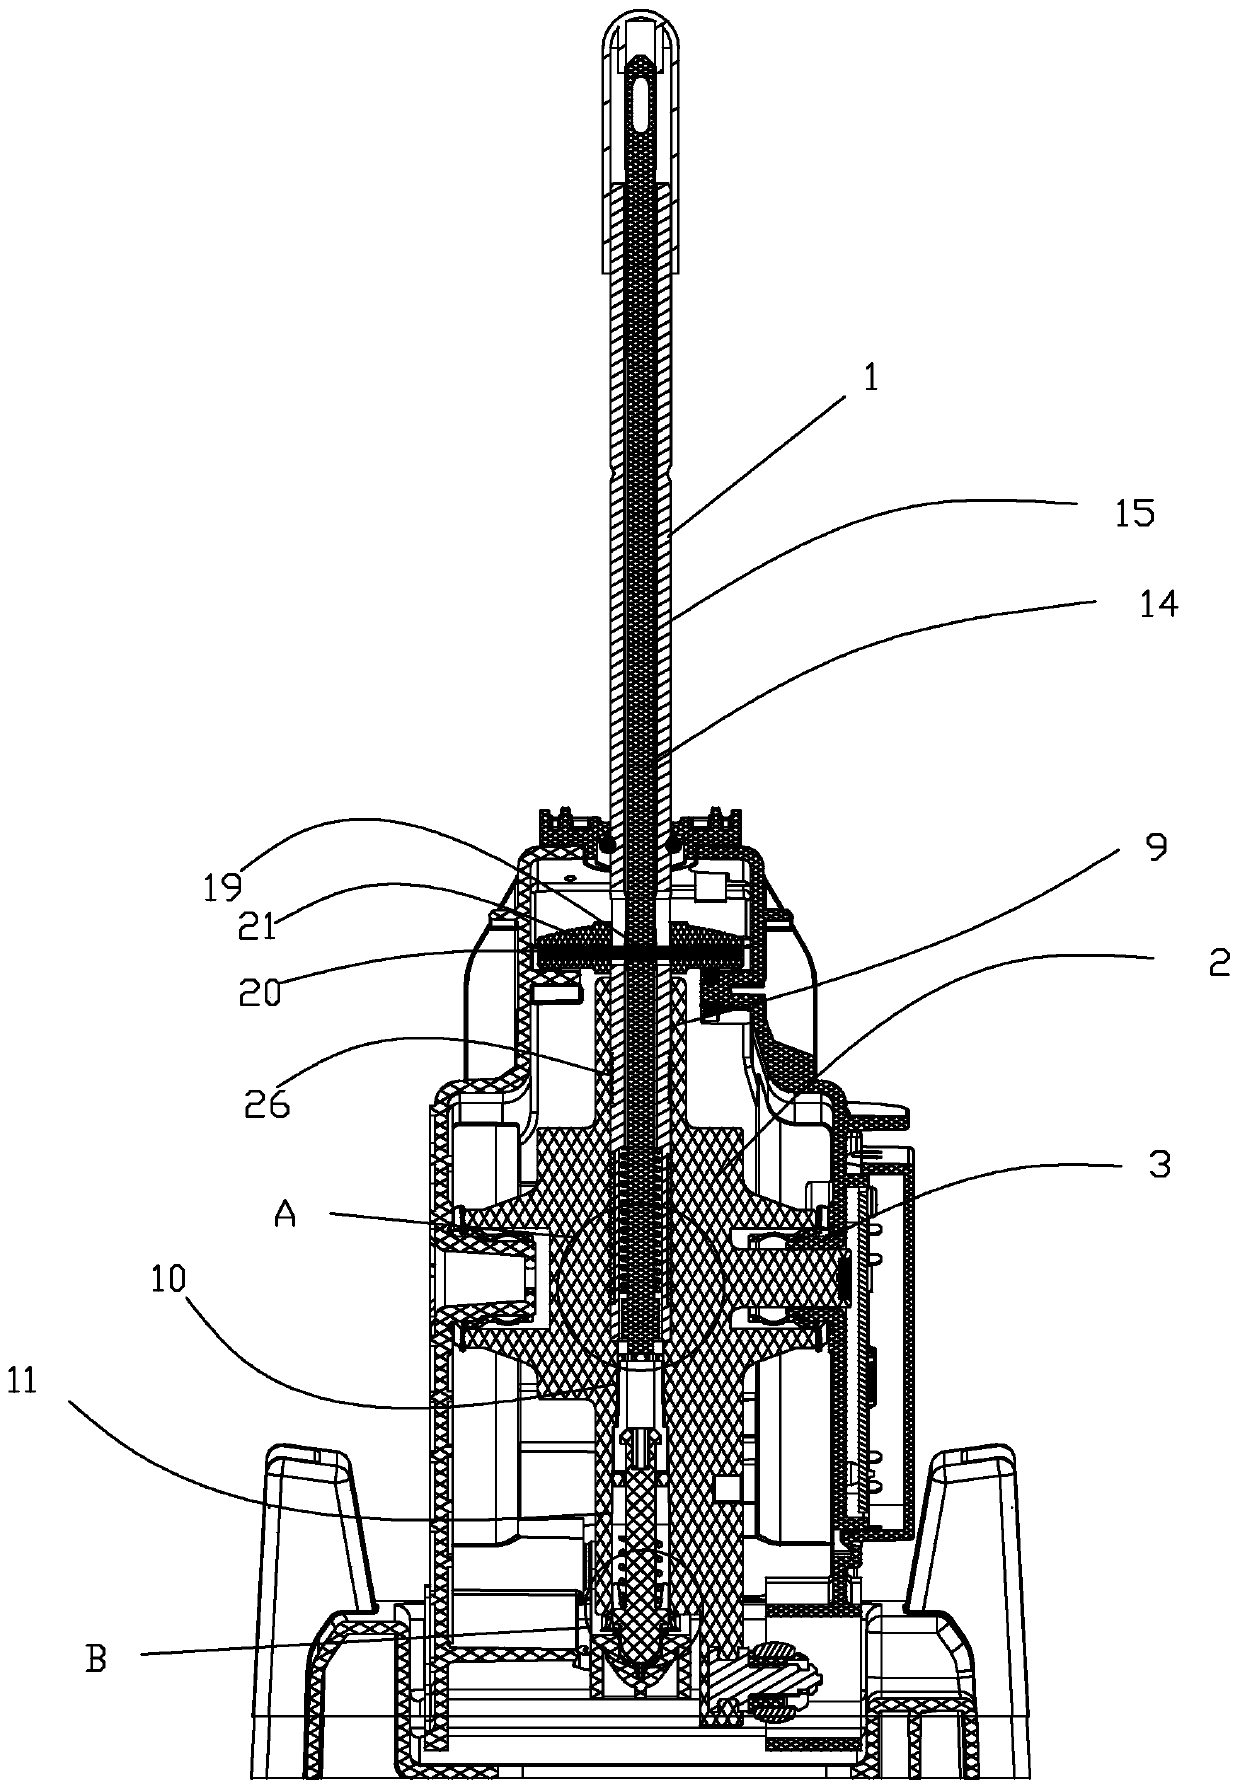 Rotating shaft for automatic gear shifter